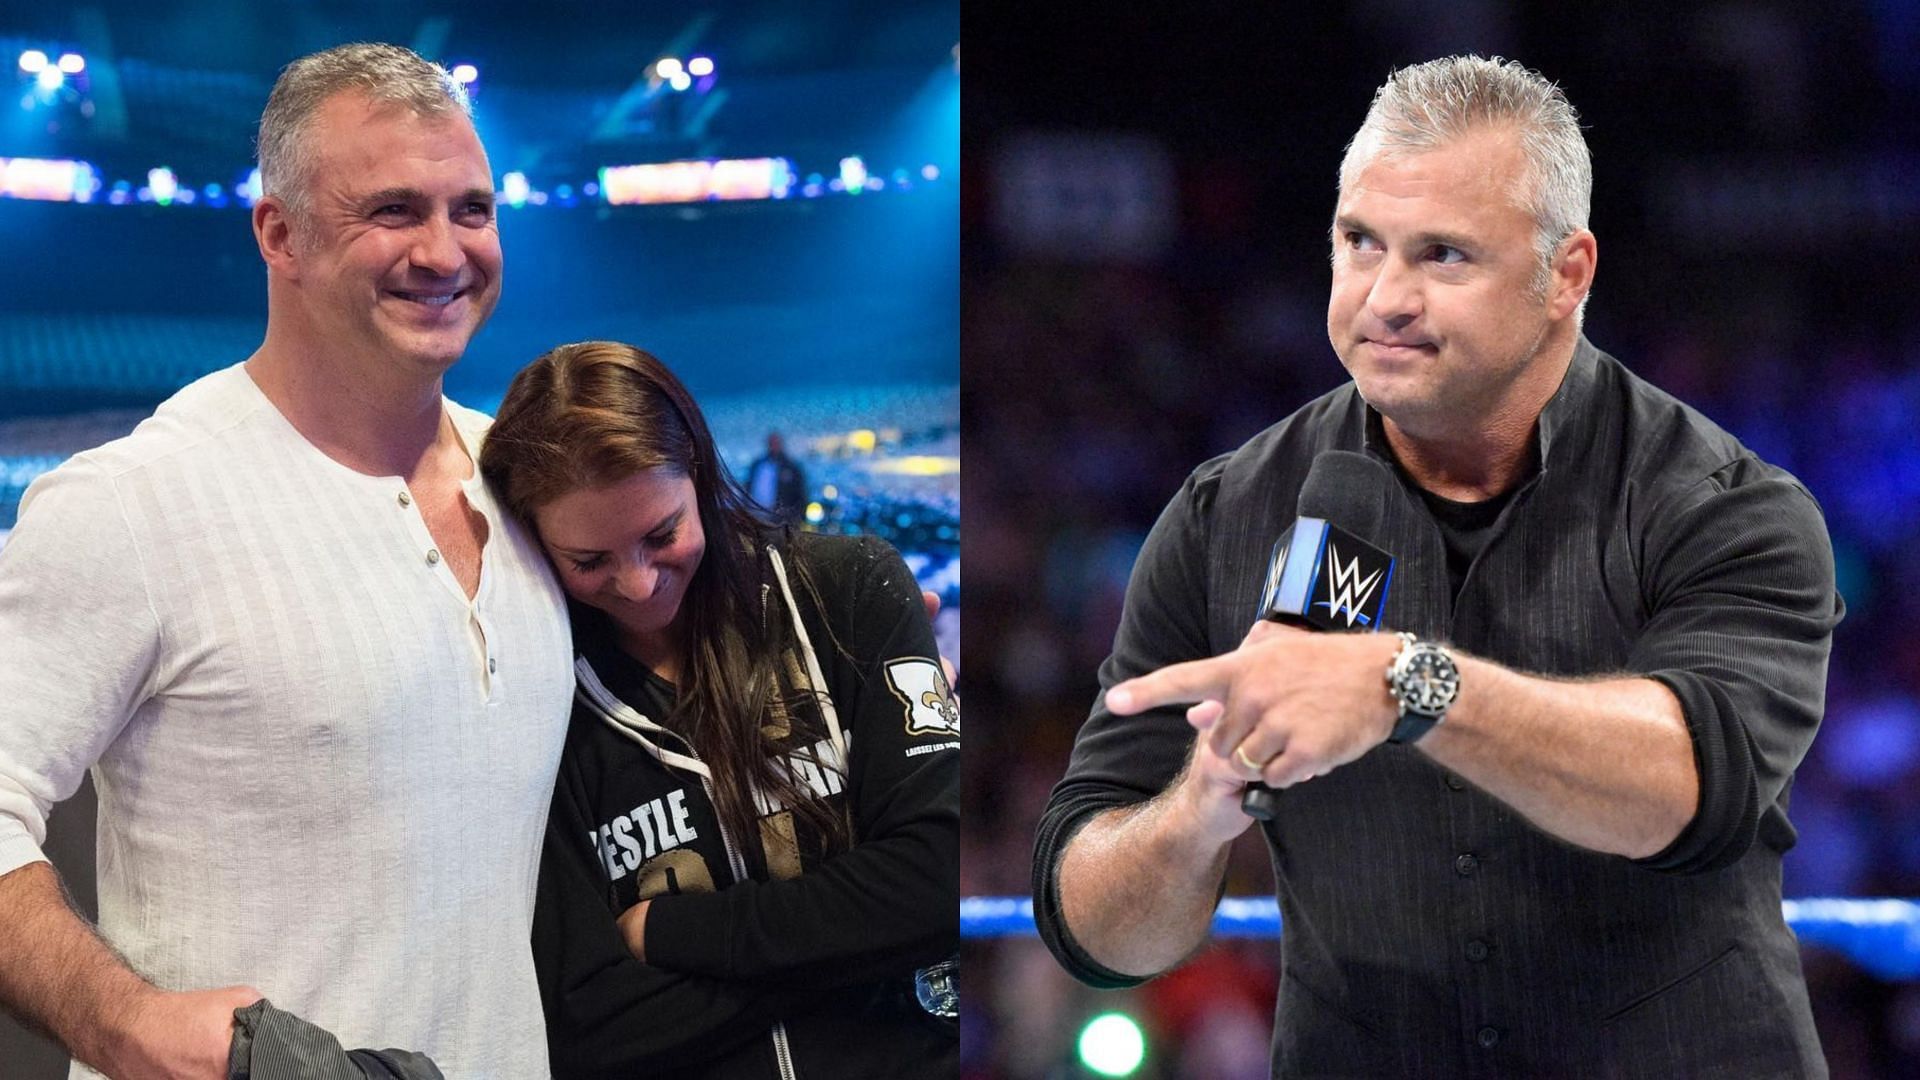 Shane McMahon was worried about his sister